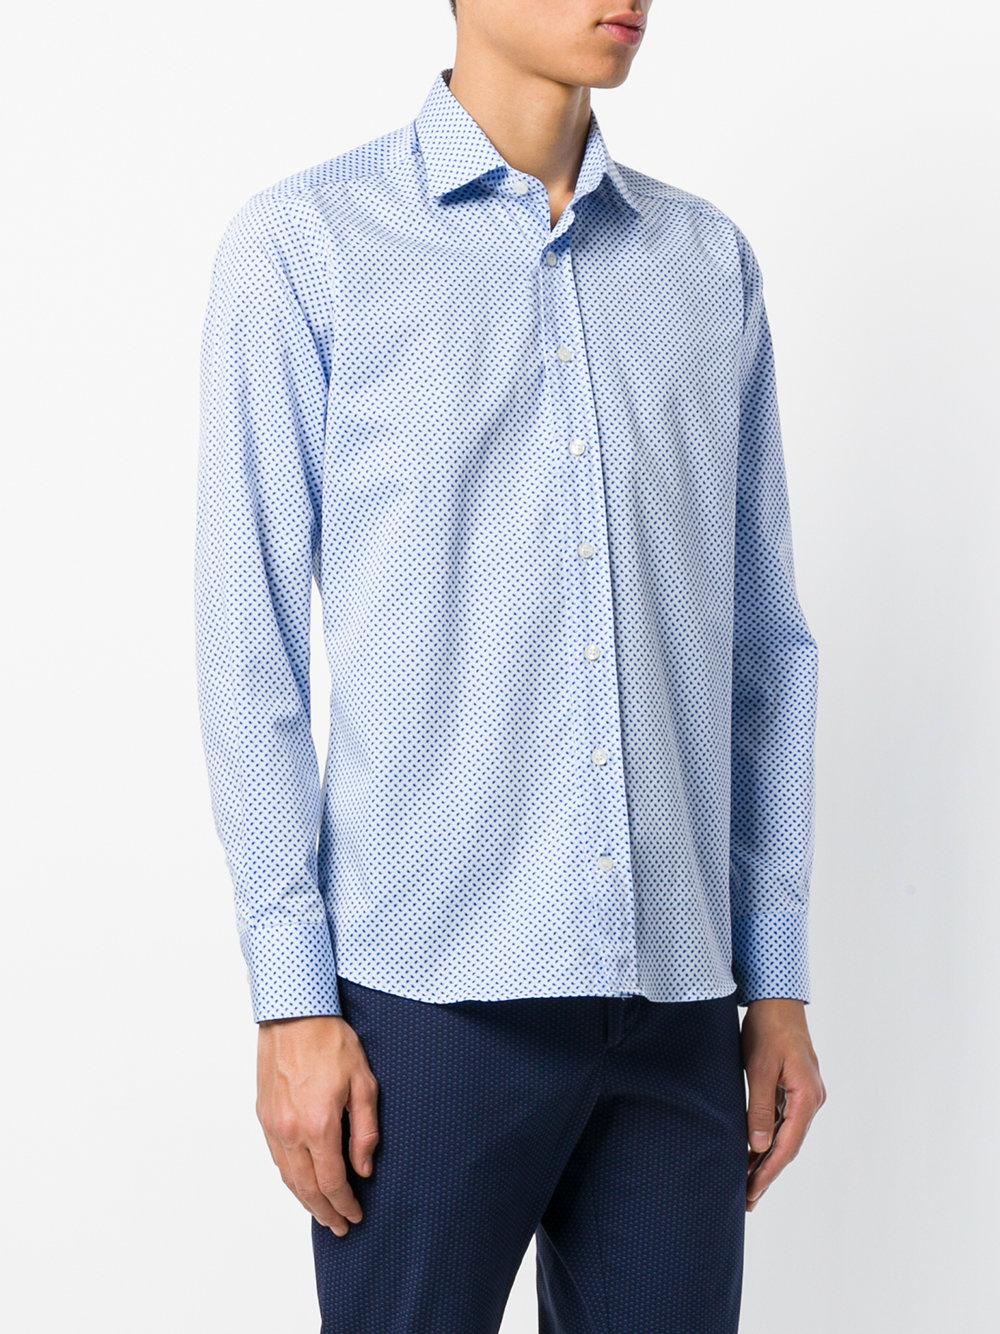 Etro Cotton Micro Pattern Shirt in Blue for Men - Lyst